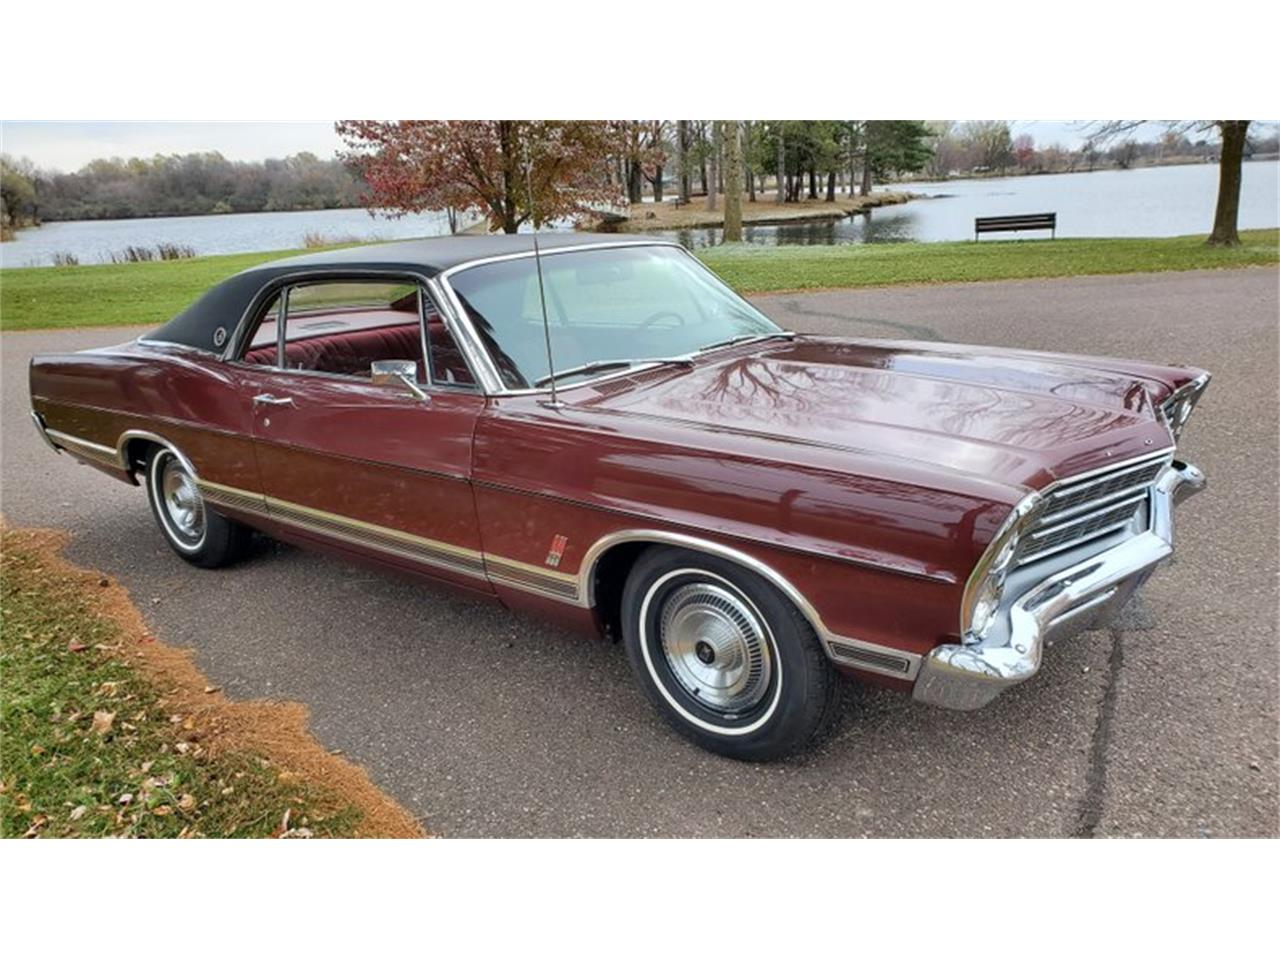 1967 Ford LTD for sale in Stanley, WI